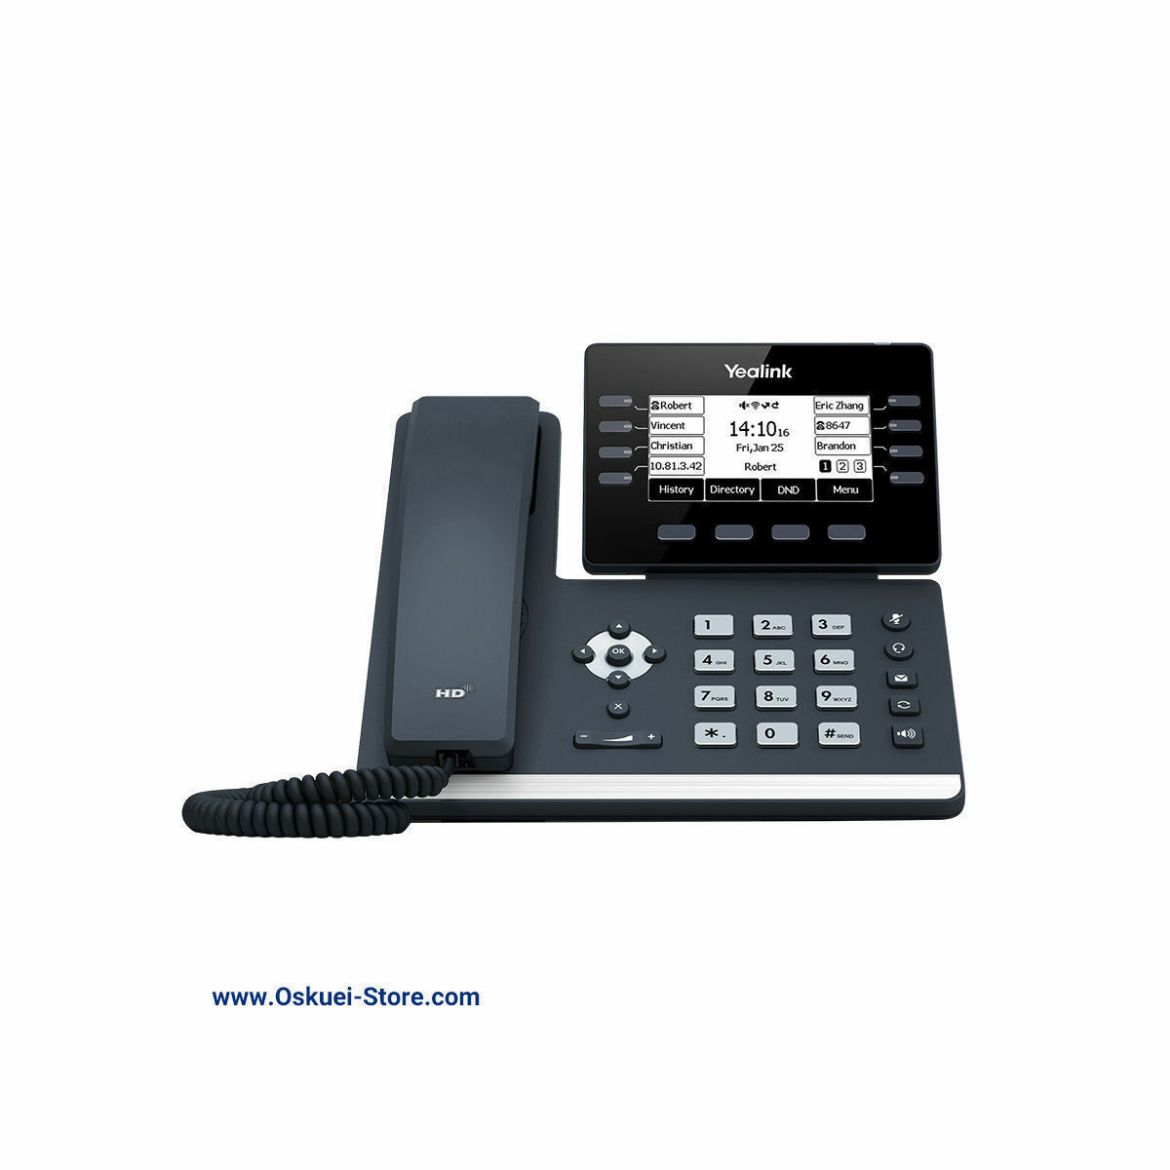 Yealink T53W VoIP SIP Telephone Black Front